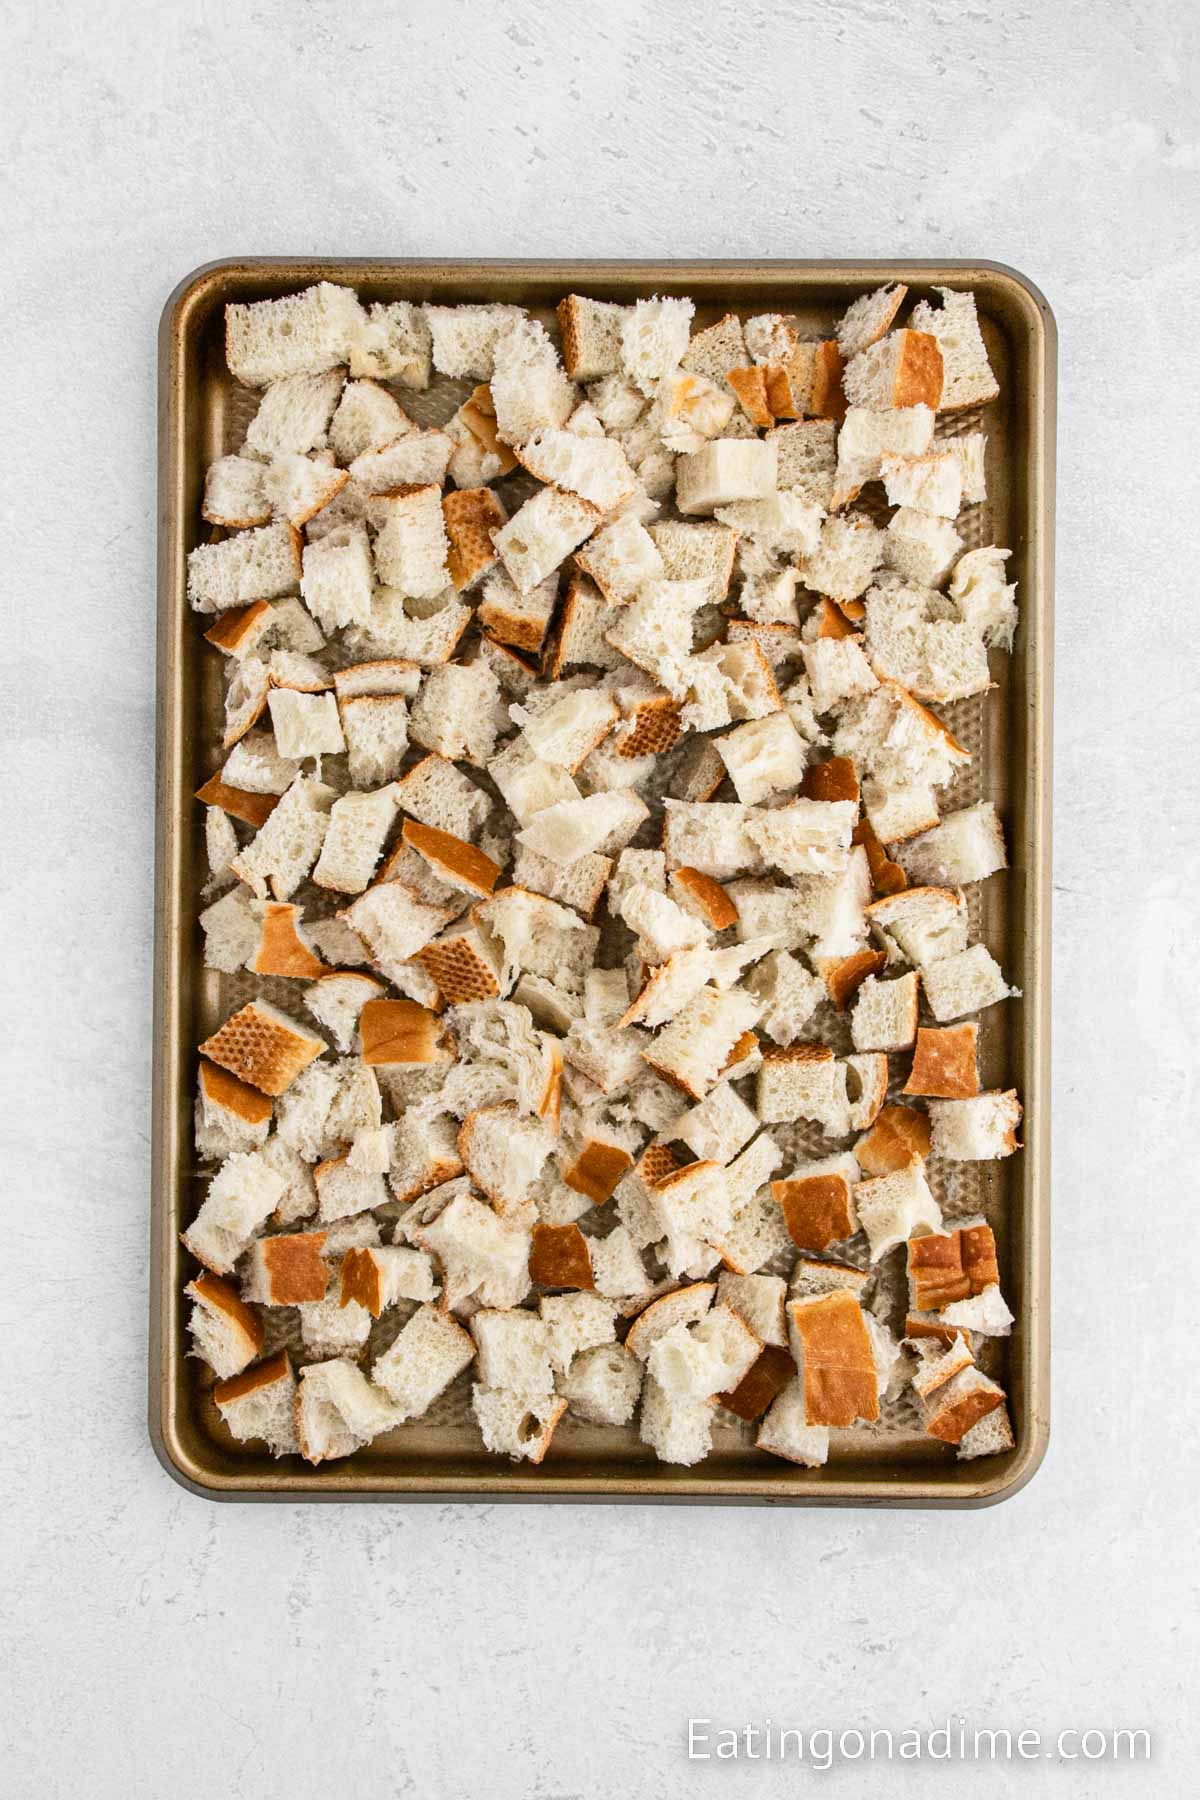 Placing the diced bread on a baking sheet